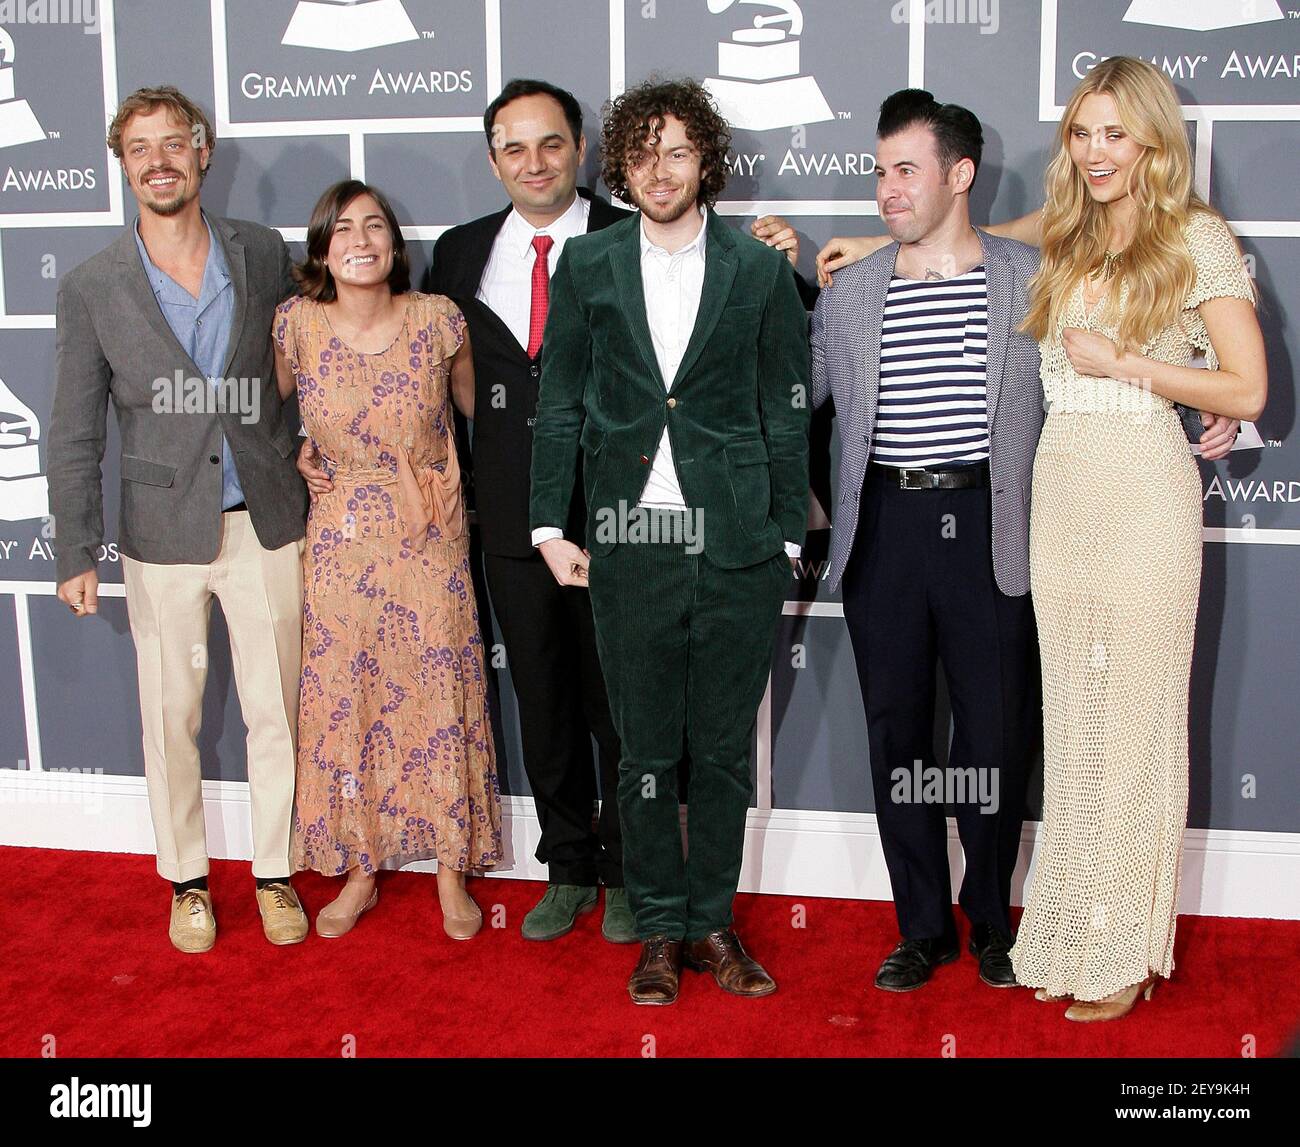 10 2013 - Los Angeles, California - Orpheo McCord, Jade Castrinos, Alex Ebert and Nora Kirkpatrick of Edward Sharpe and The Magnetic Zeros. The 55th GRAMMY held at STAPLES